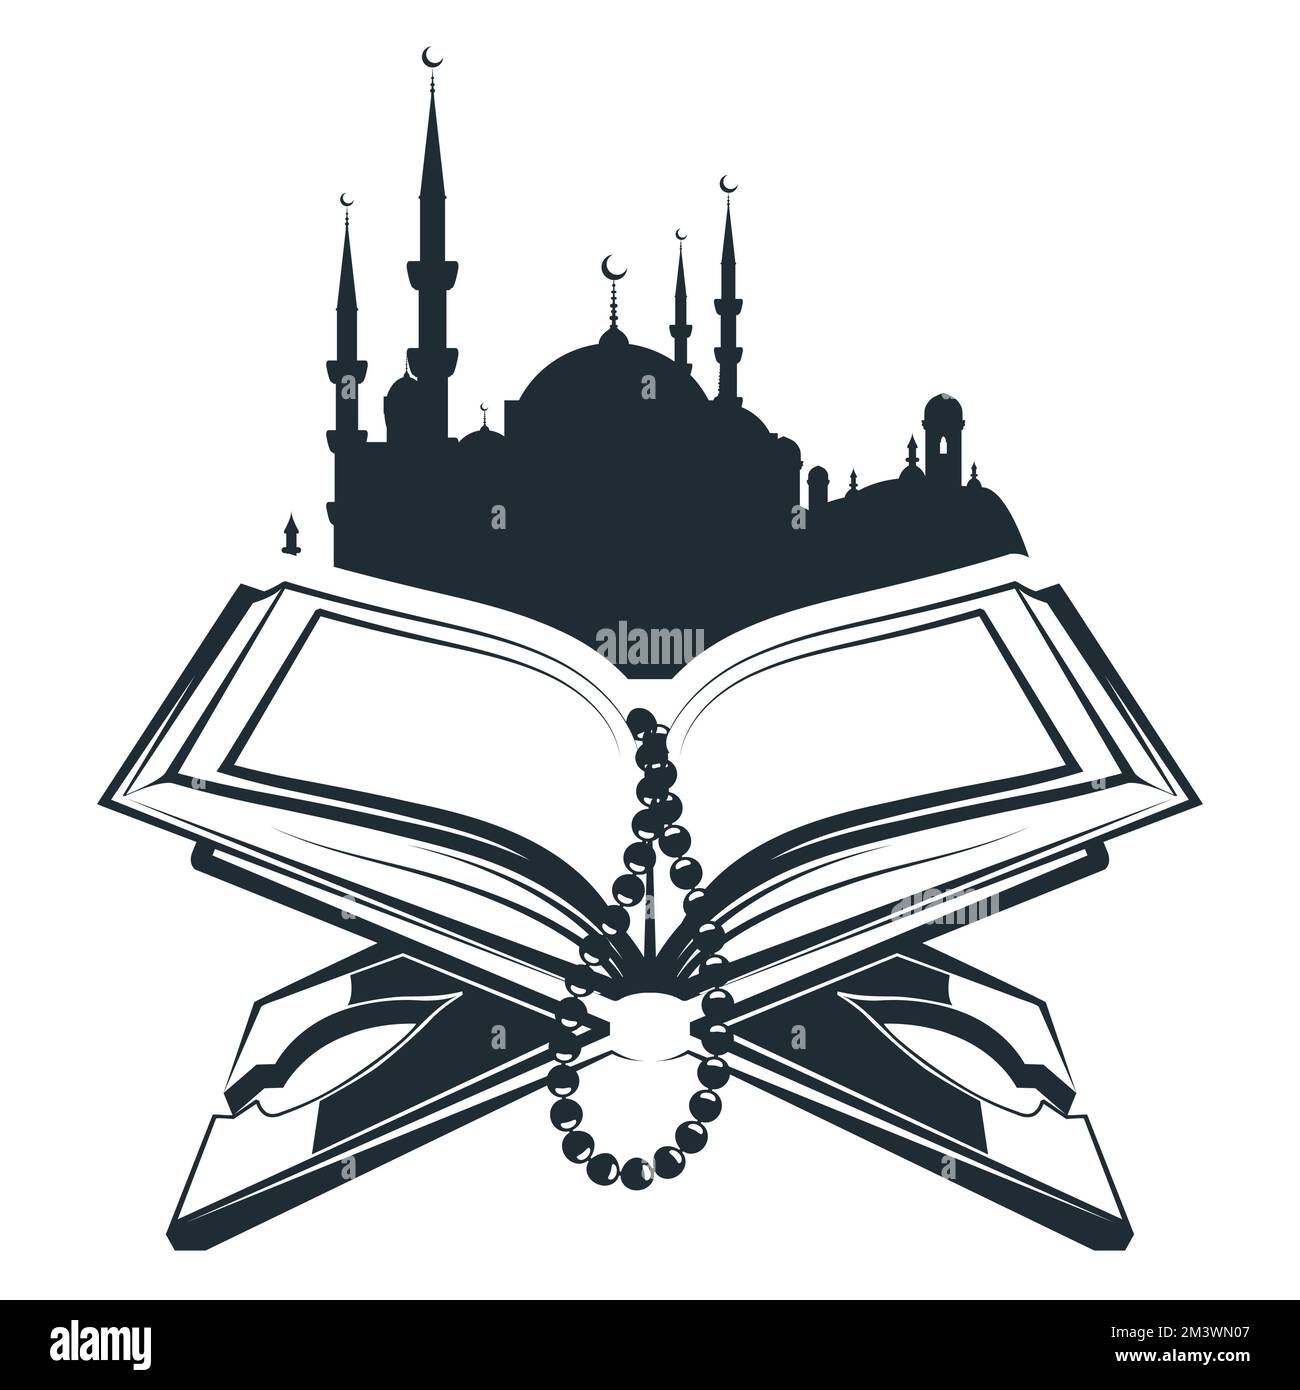 Quran on wooden board stand and mosque building silhouette, open koran and prayer beads, vector Stock Vector